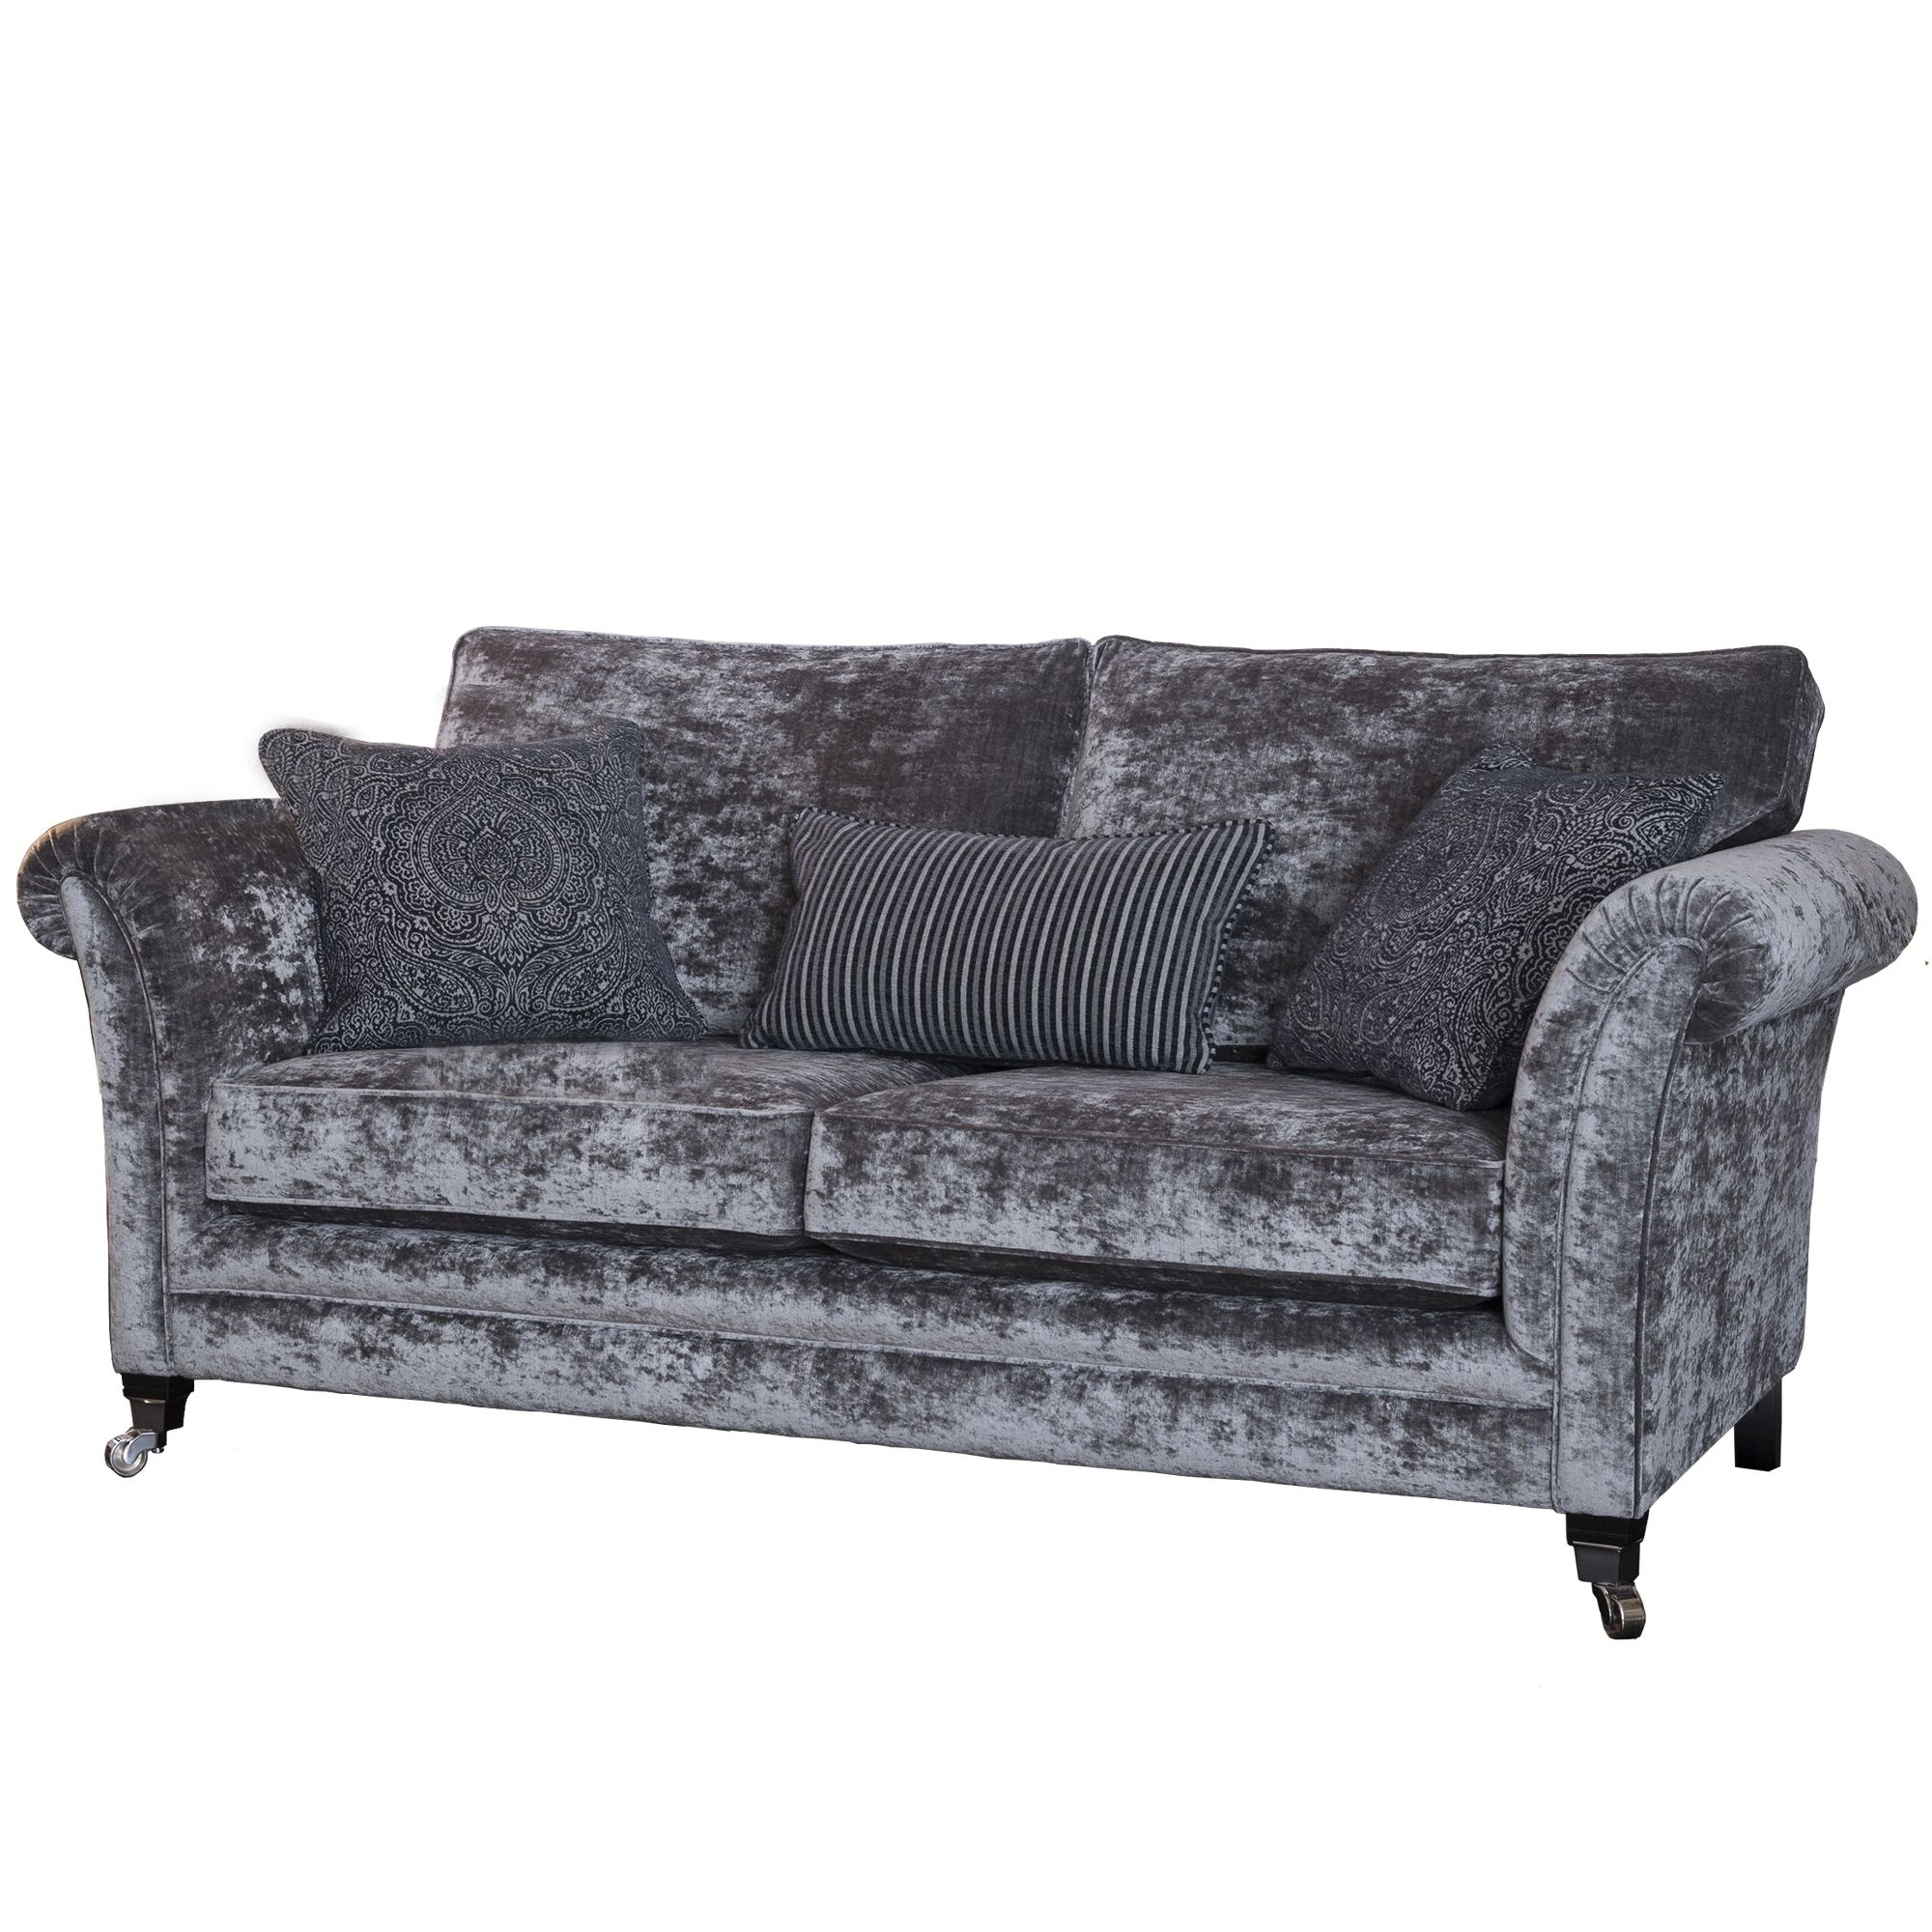 Linwood Loveseats With Cushions In Recent Cookes Collection Linwood 3 Seater Sofa (View 22 of 25)